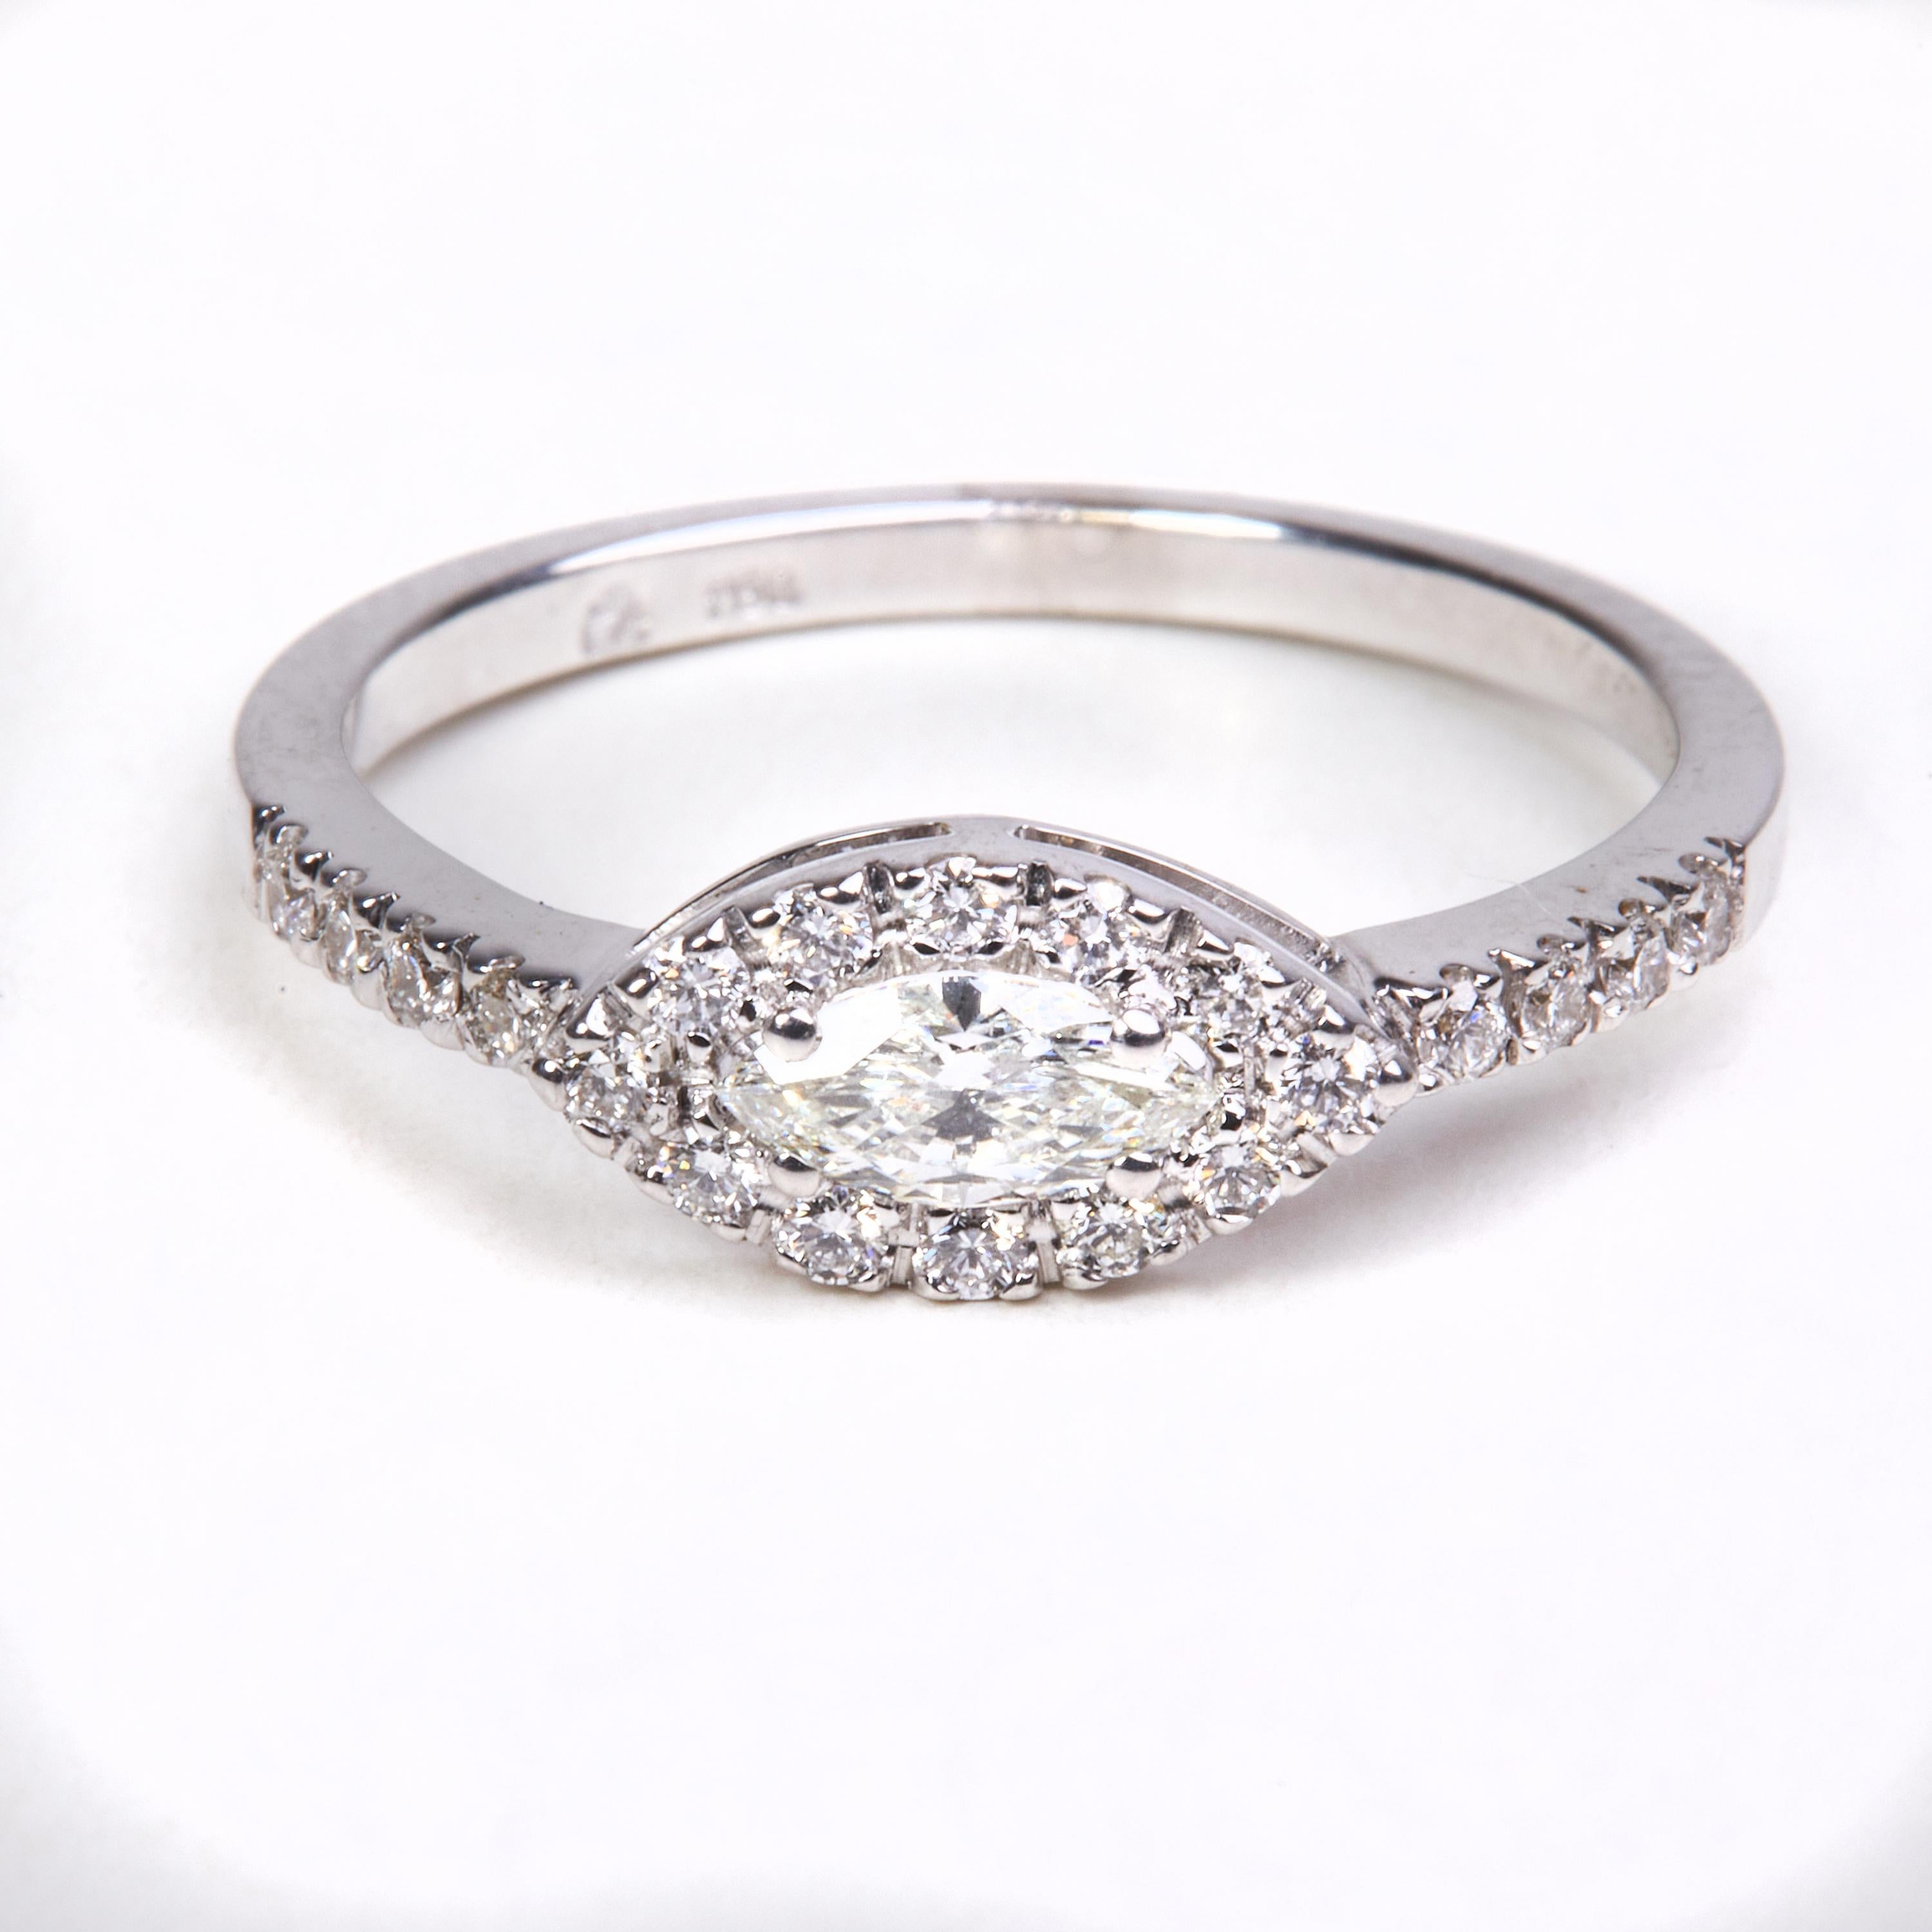 18 Karat White Gold Diamond  Ring

22 Diam. 0.20 carat
1 Diamant  Marquise 0.21 carat



Size EU 52 US 6.1


Founded in 1974, Gianni Lazzaro is a family-owned jewelery company based out of Düsseldorf, Germany.
Although rooted in Germany, Gianni